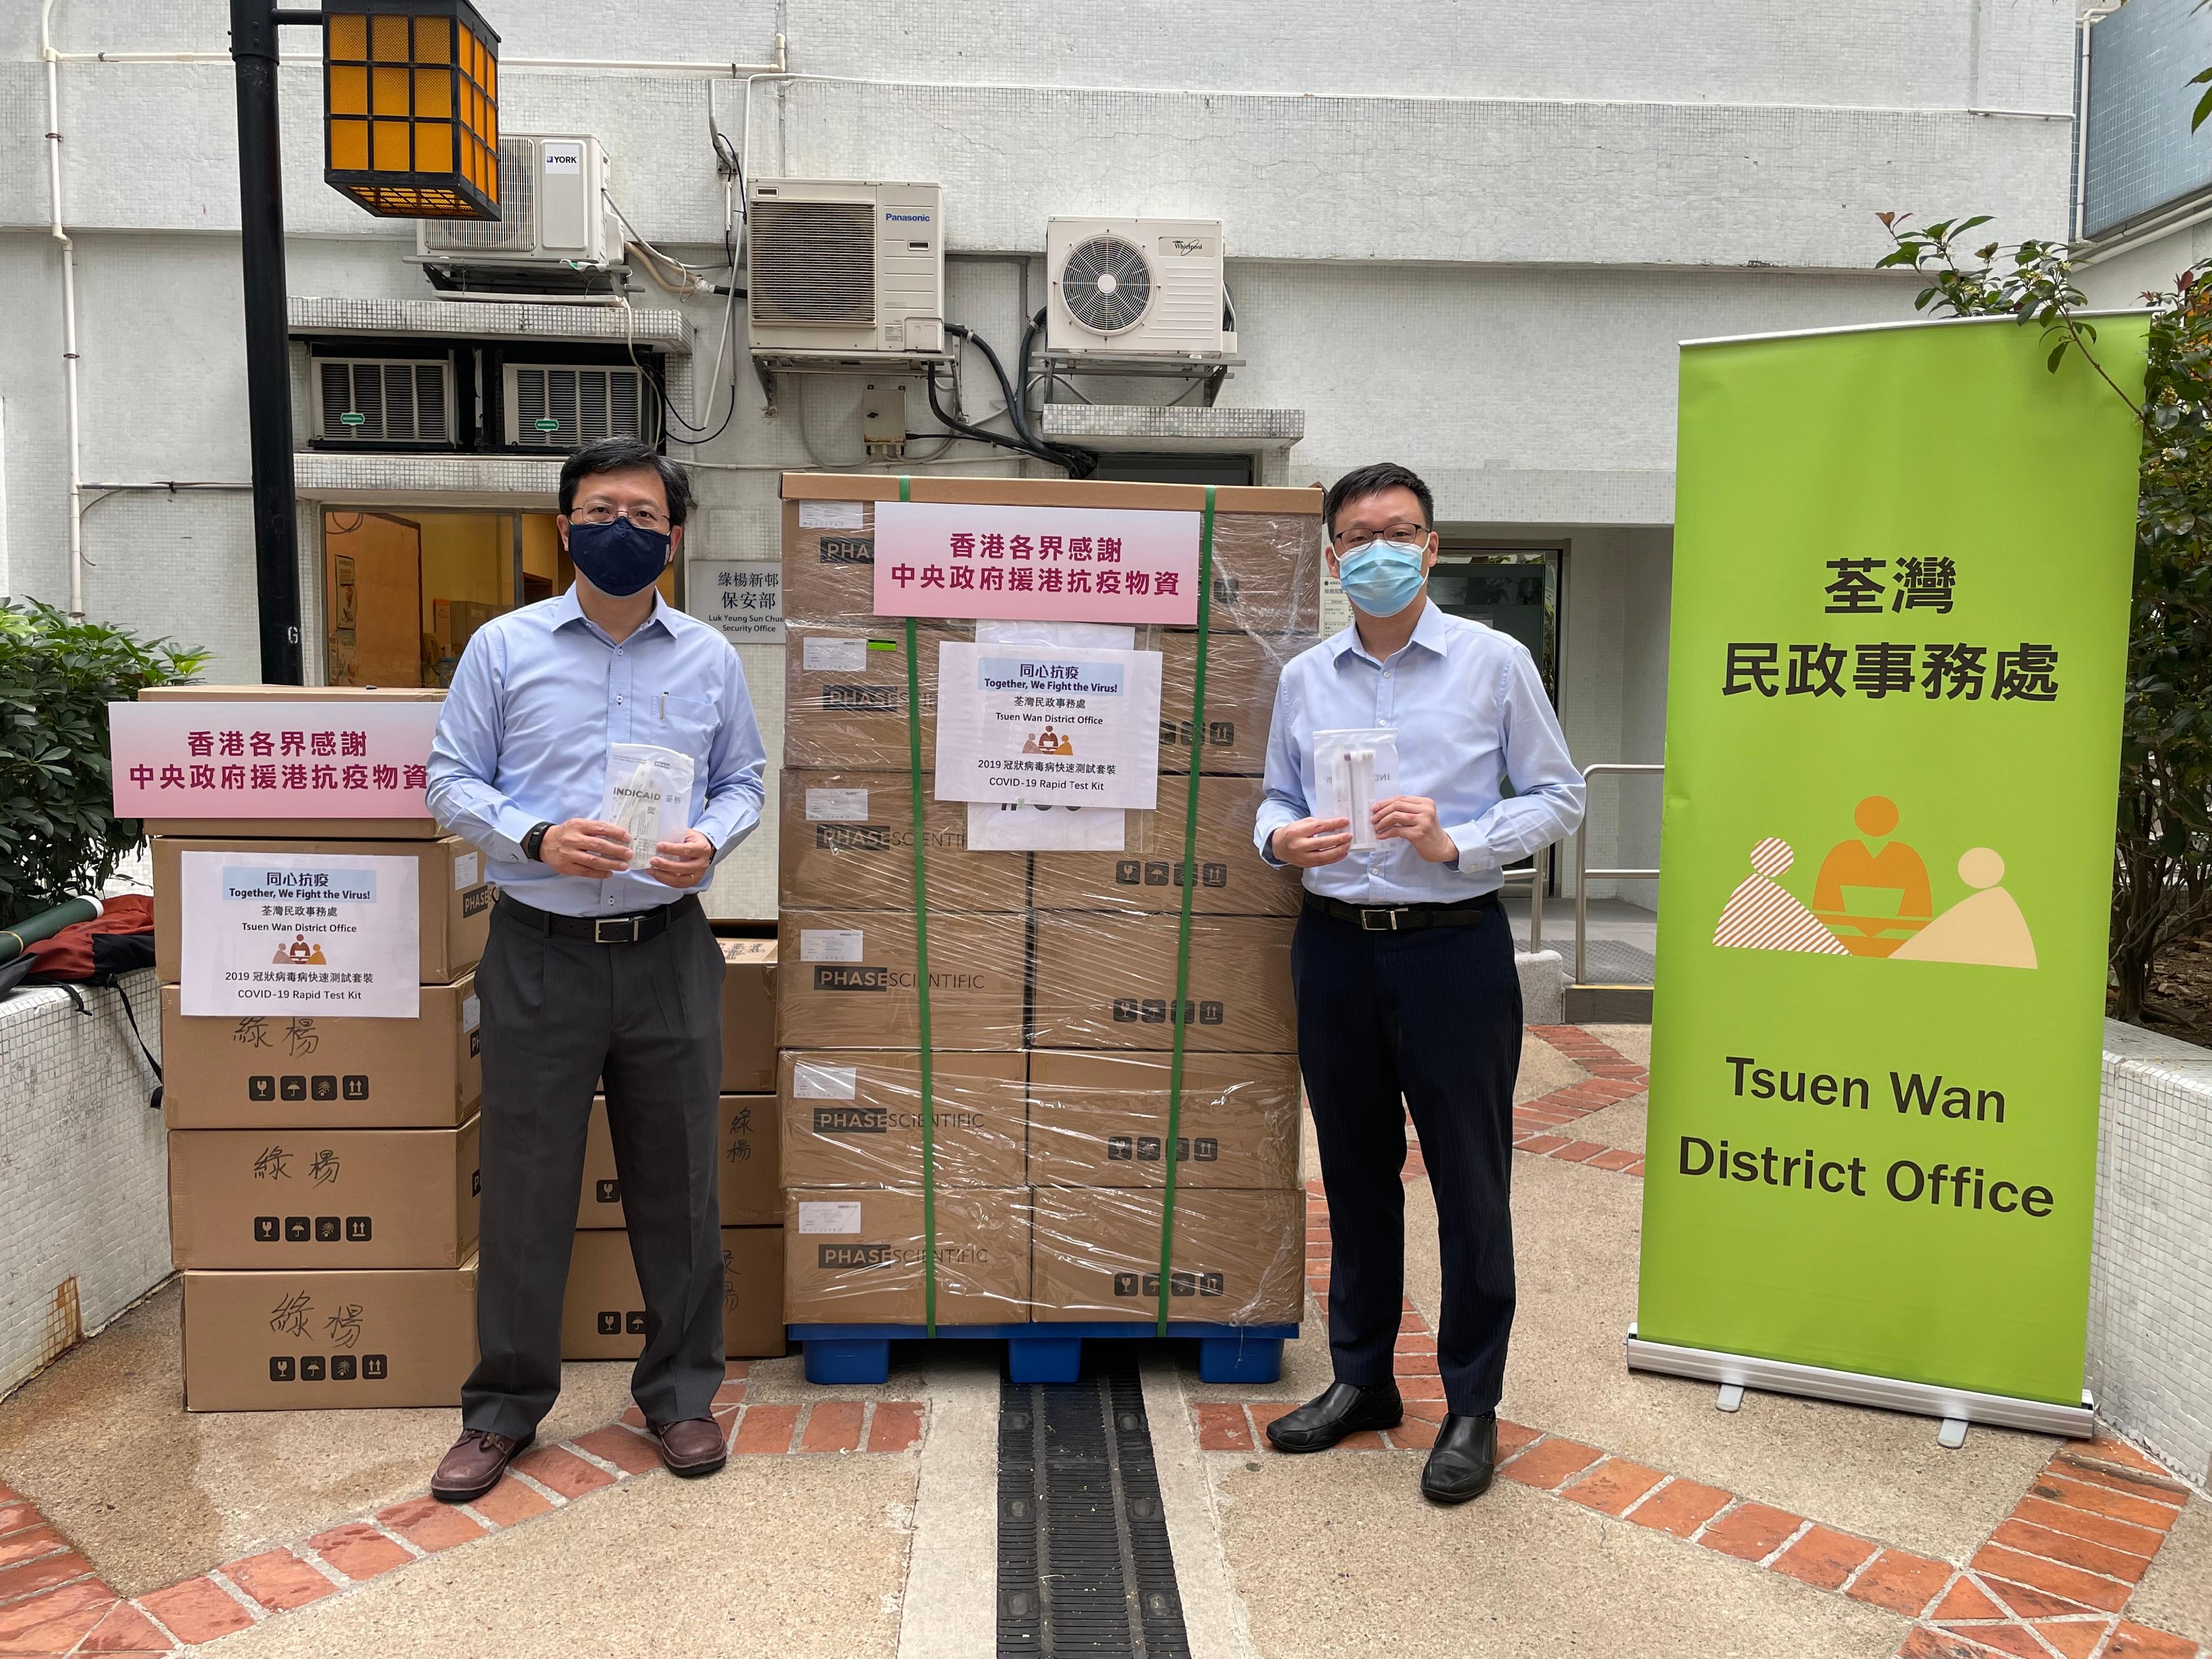 The Tsuen Wan District Office today (March 16) distributed COVID-19 rapid test kits to households, cleansing workers and property management staff living and working in Luk Yeung Sun Chuen for voluntary testing through the property management company.